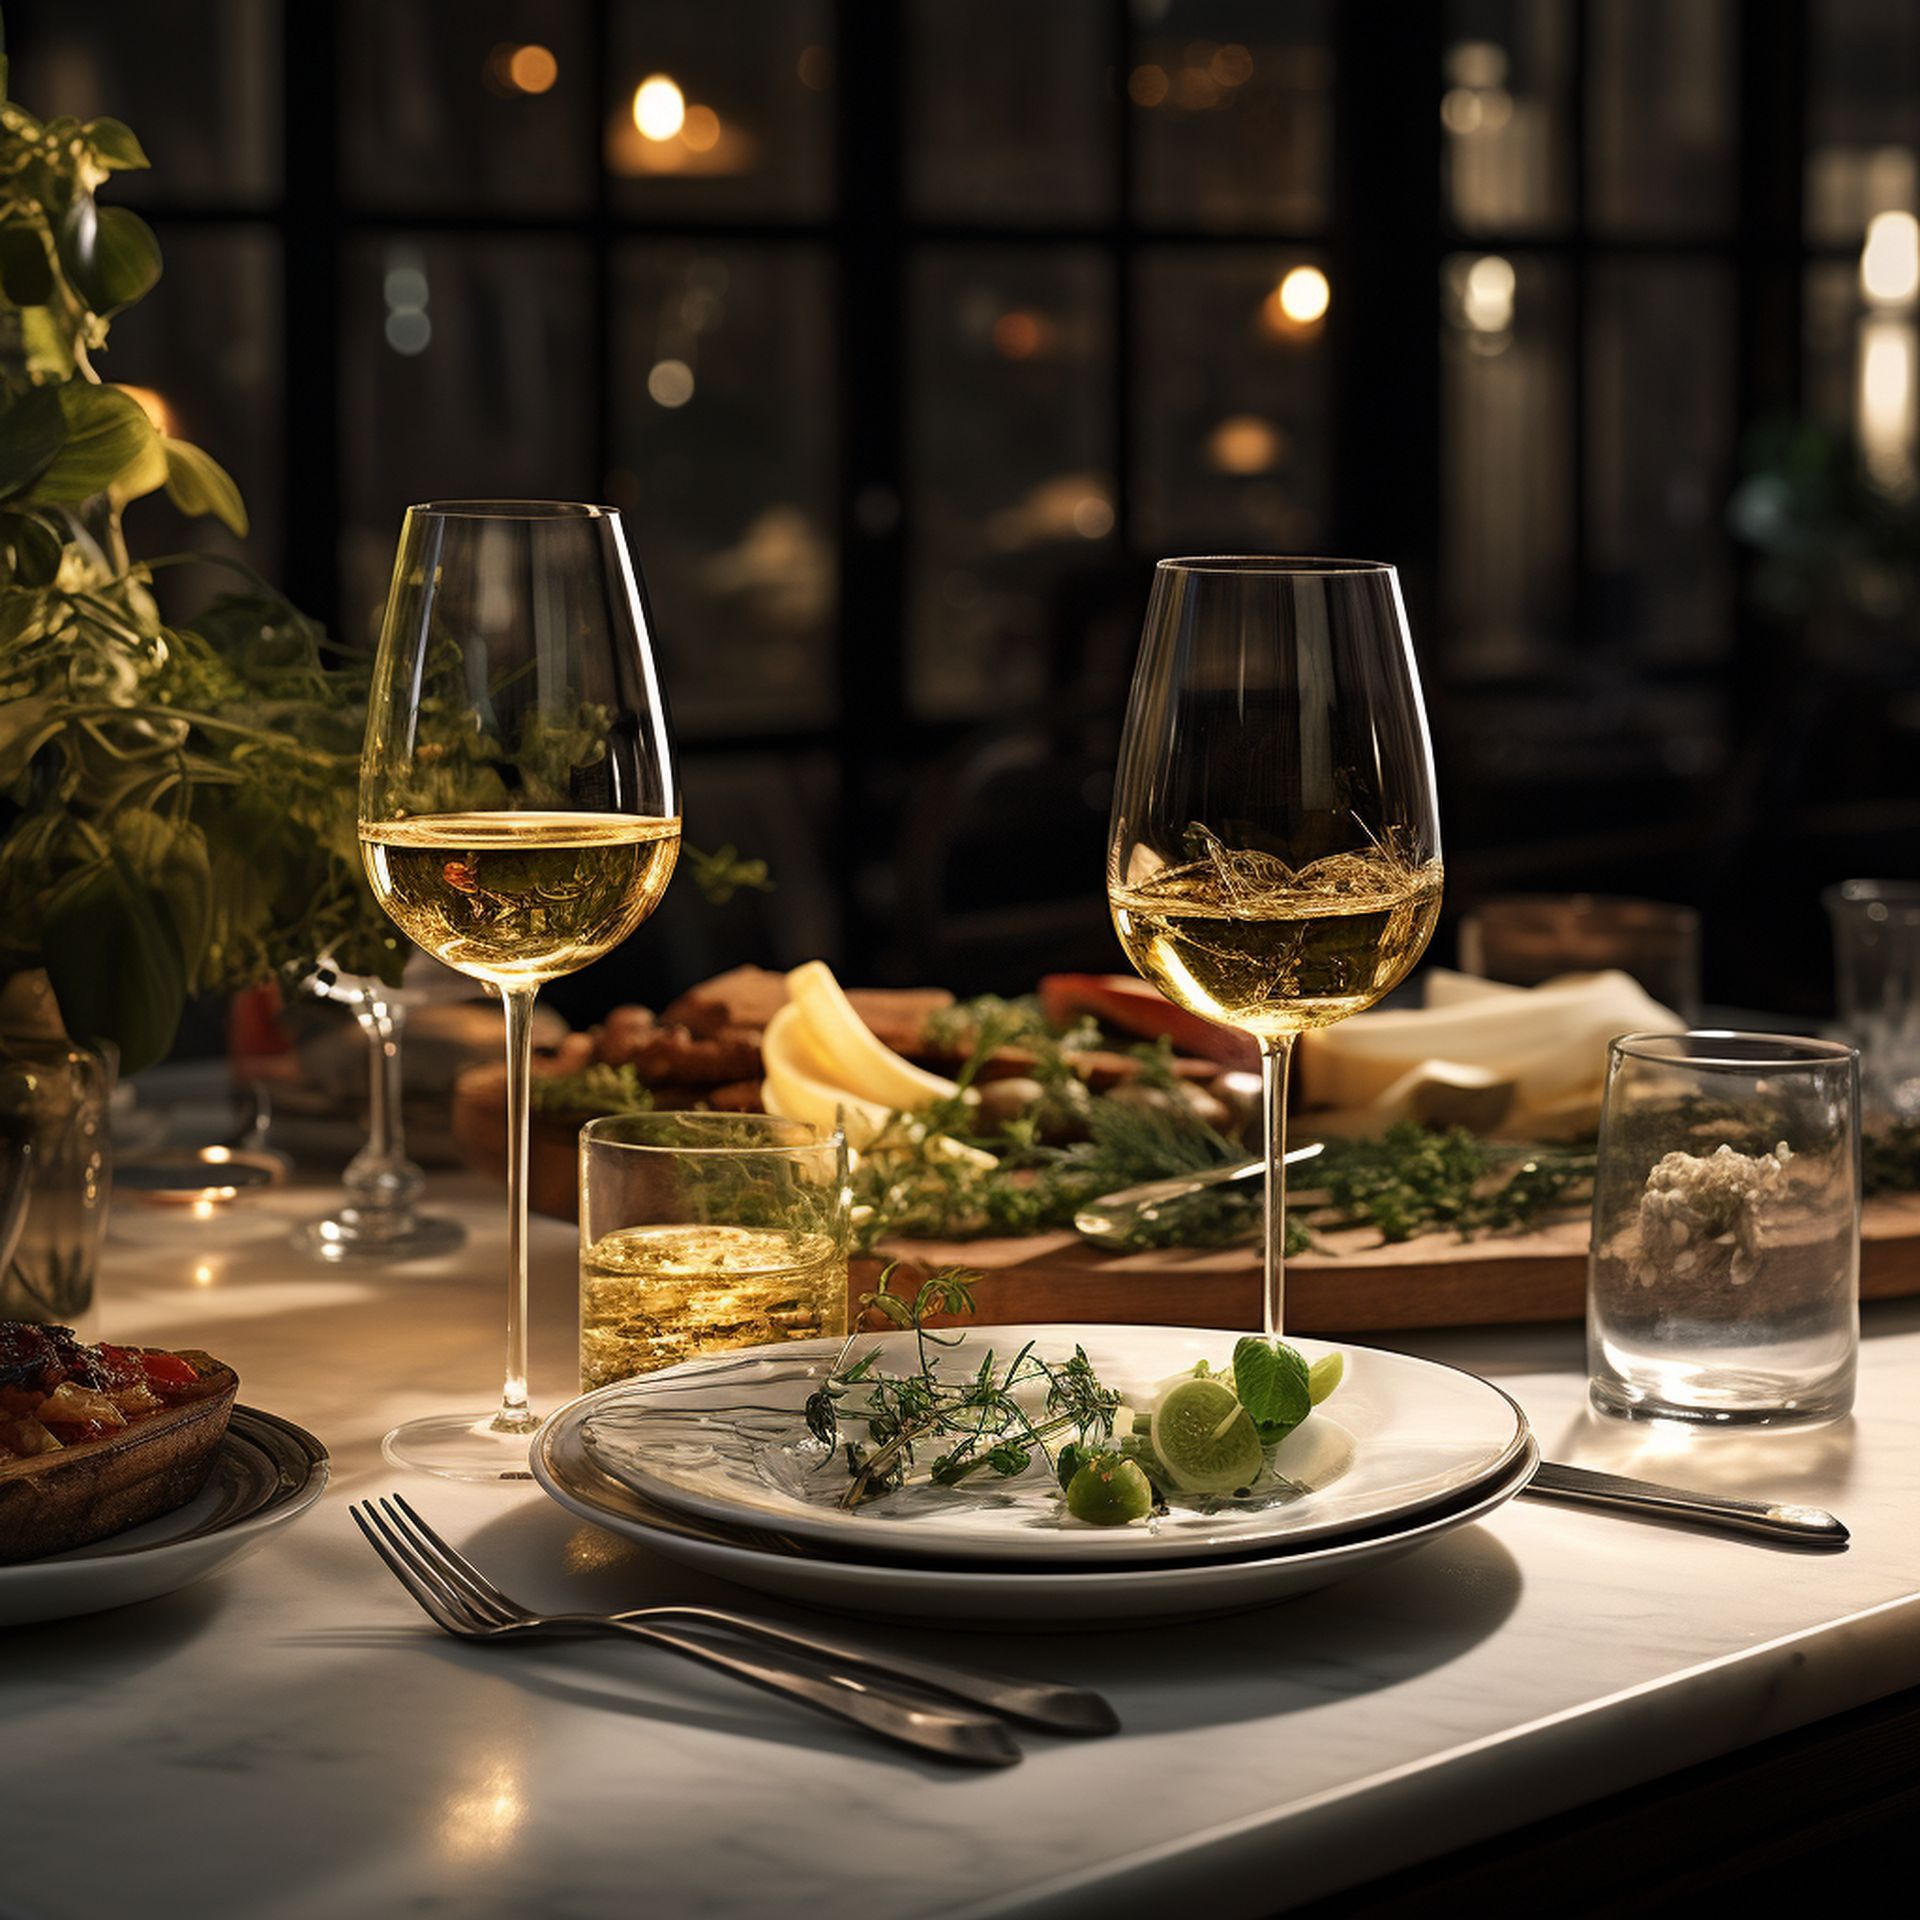 Influential and intense, a sophisticated dinner setting with Sauvignon Blanc wine, elegant glassware